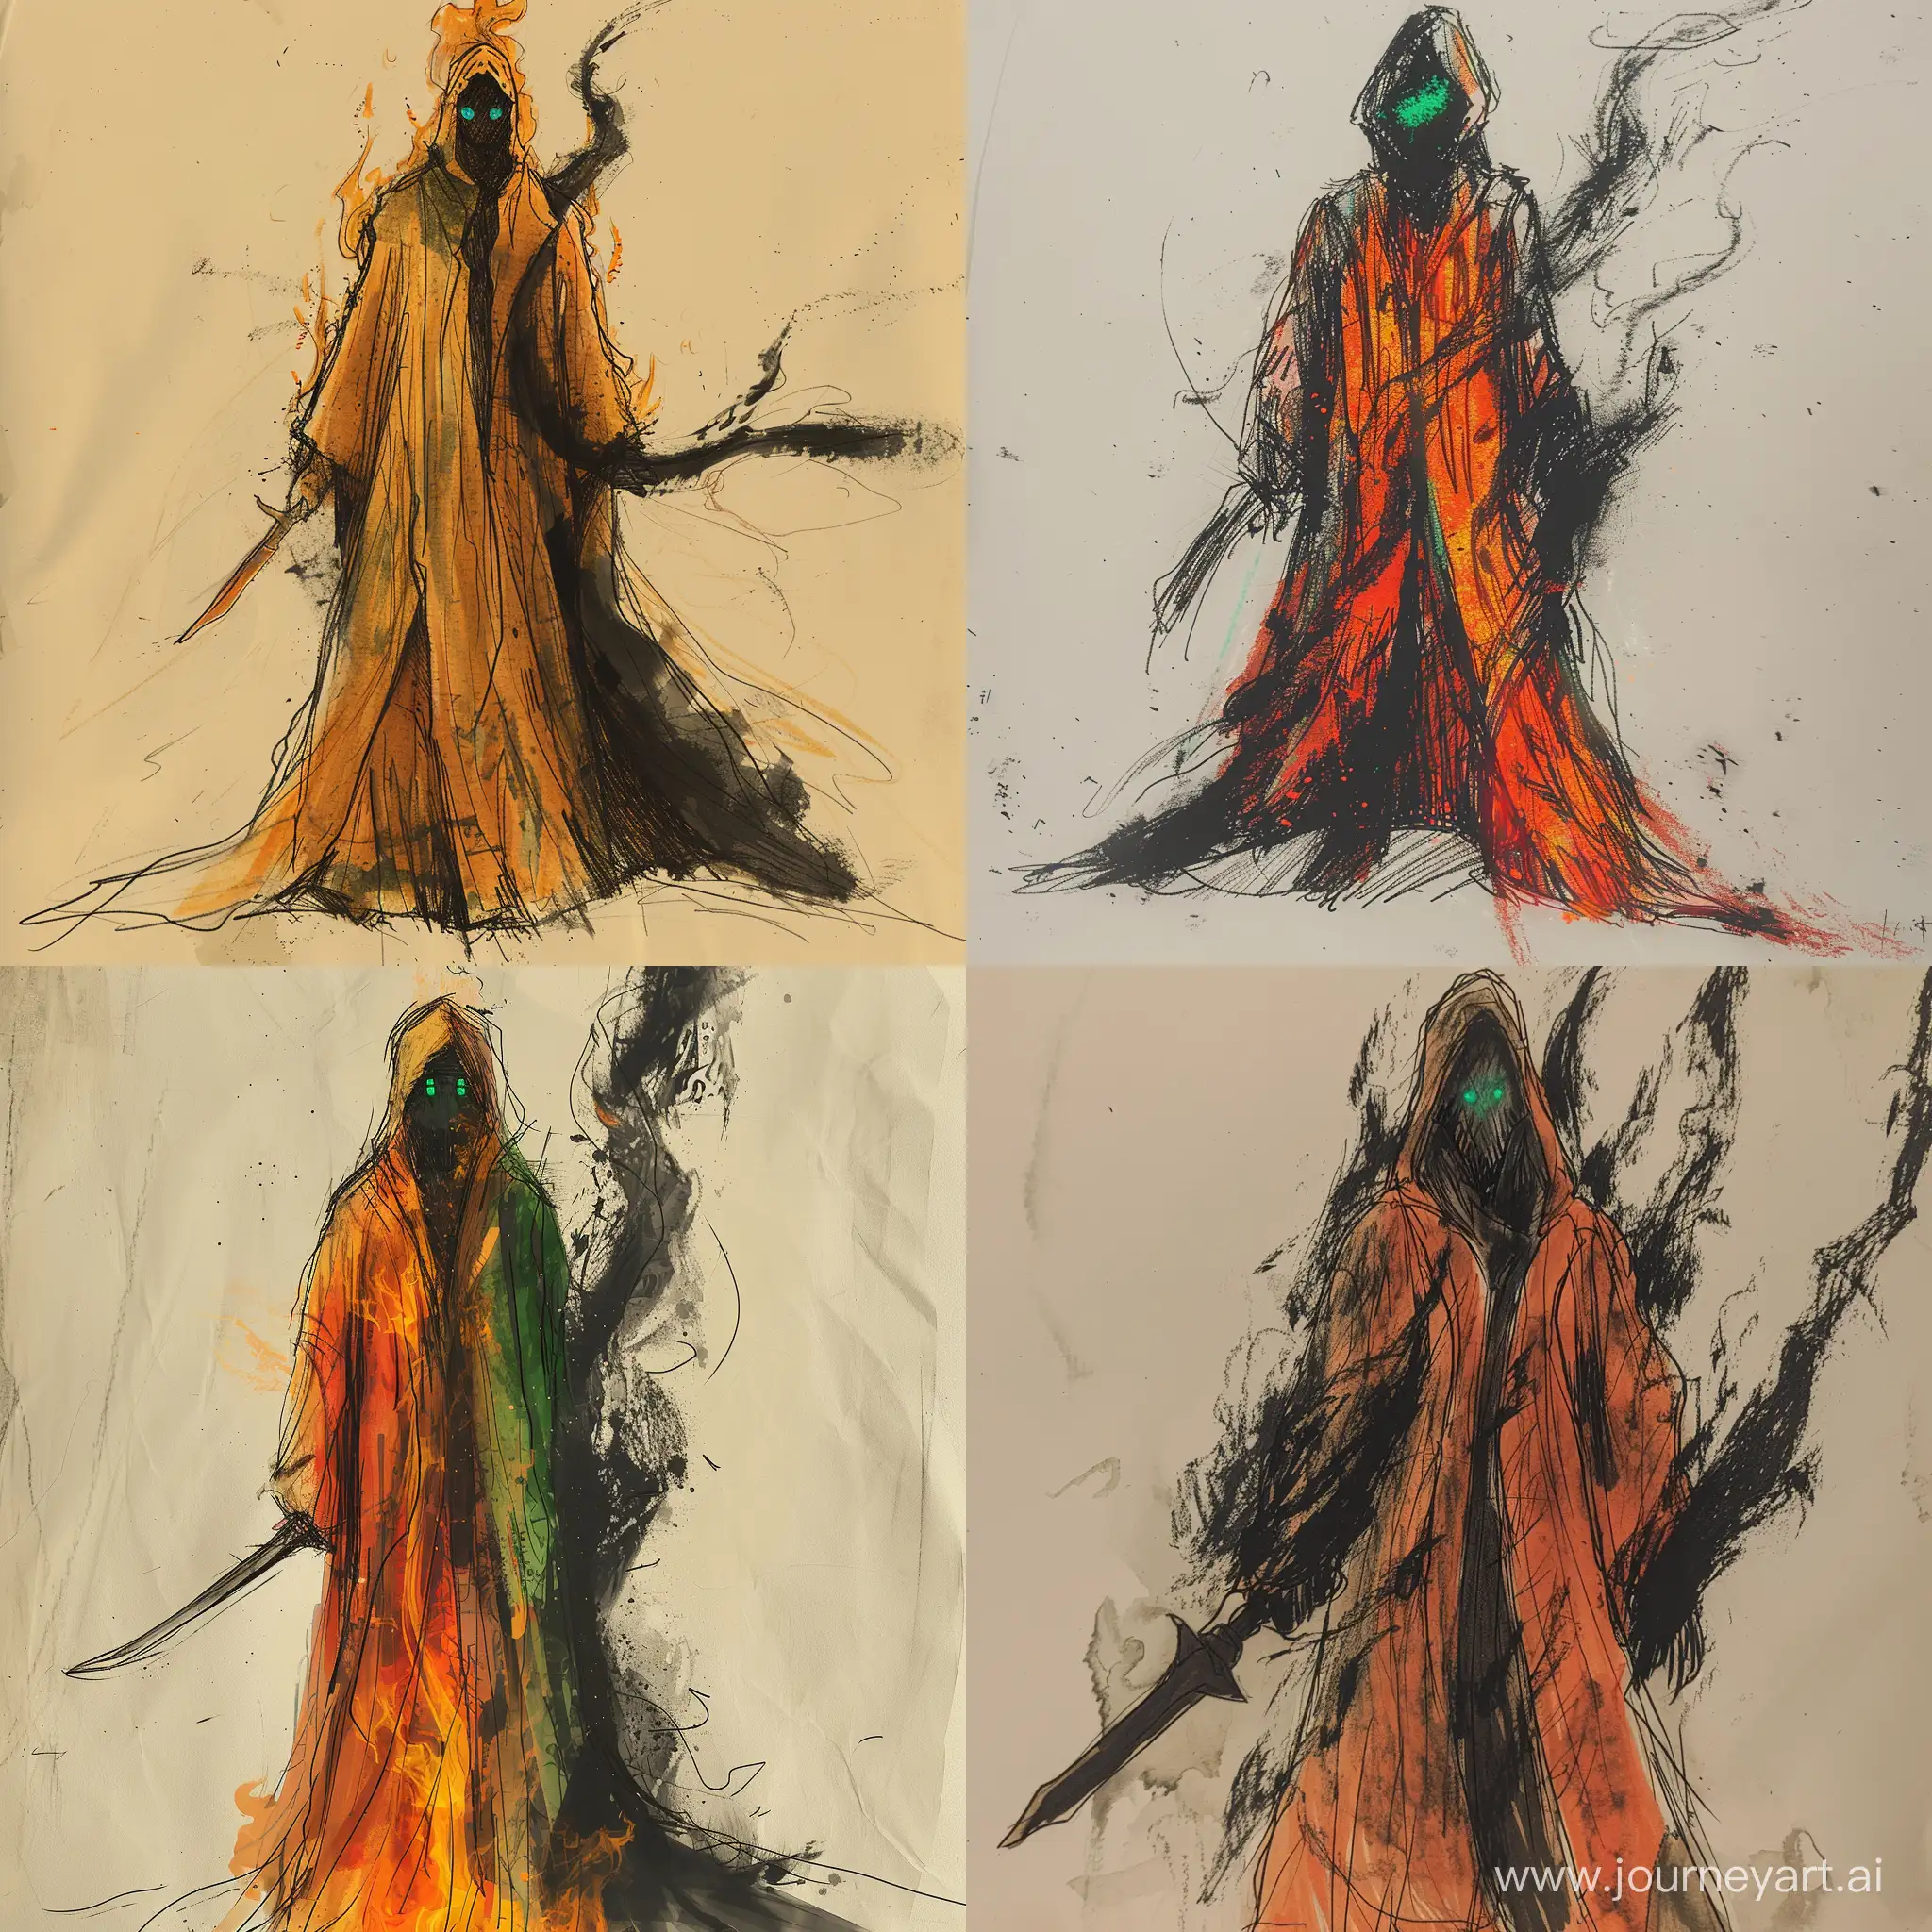 sketch of a figure, a burning robe, two colors penetrating each other, a face hidden under a hood, eyes in the shape of emeralds, black mist flowing from under the clothes, a machete a product of magic, the blade was waving